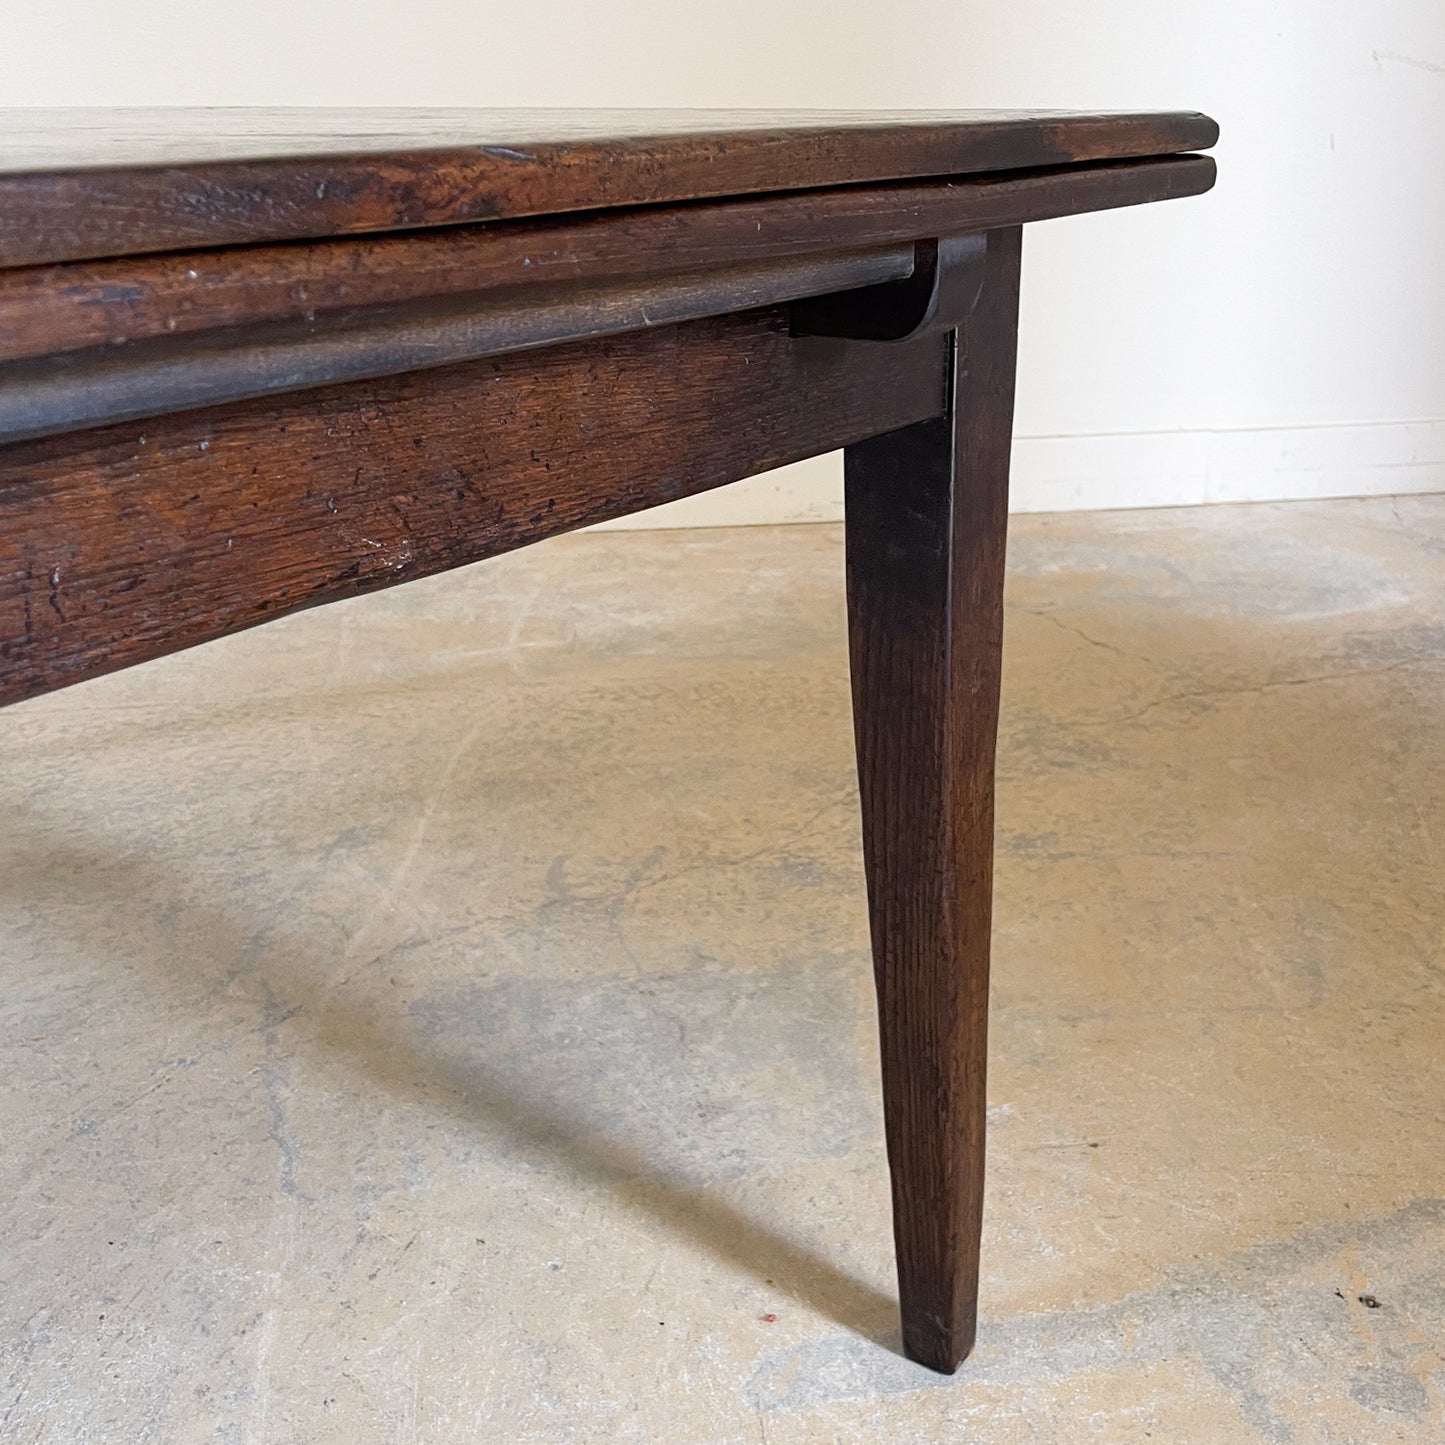 Antique French Fruitwood Drawleaf Table